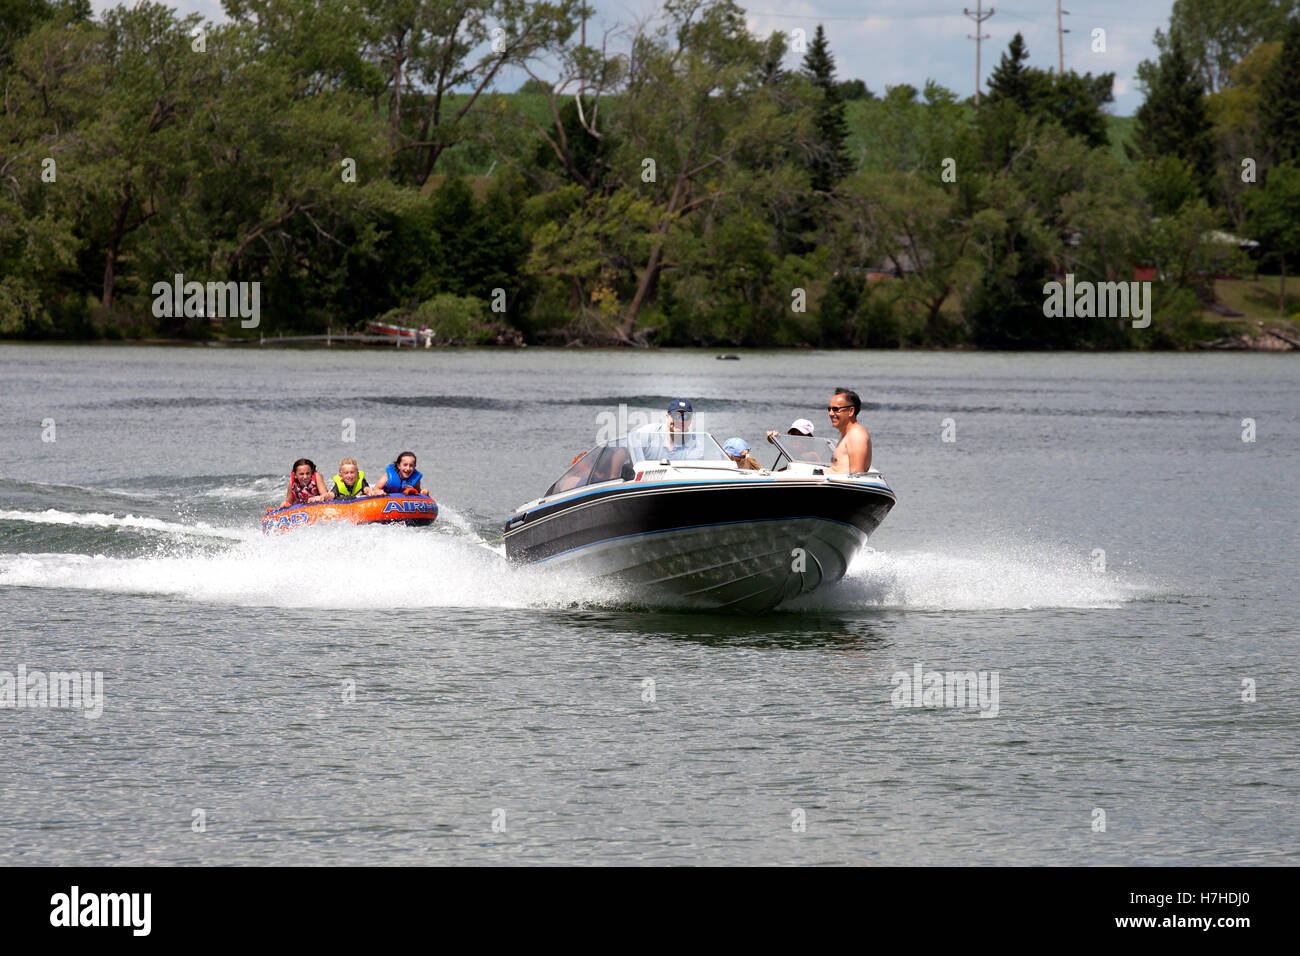 Parents pulling their kids on a water tube with speed boat on a lake. Clitherall Minnesota MN USA Stock Photo